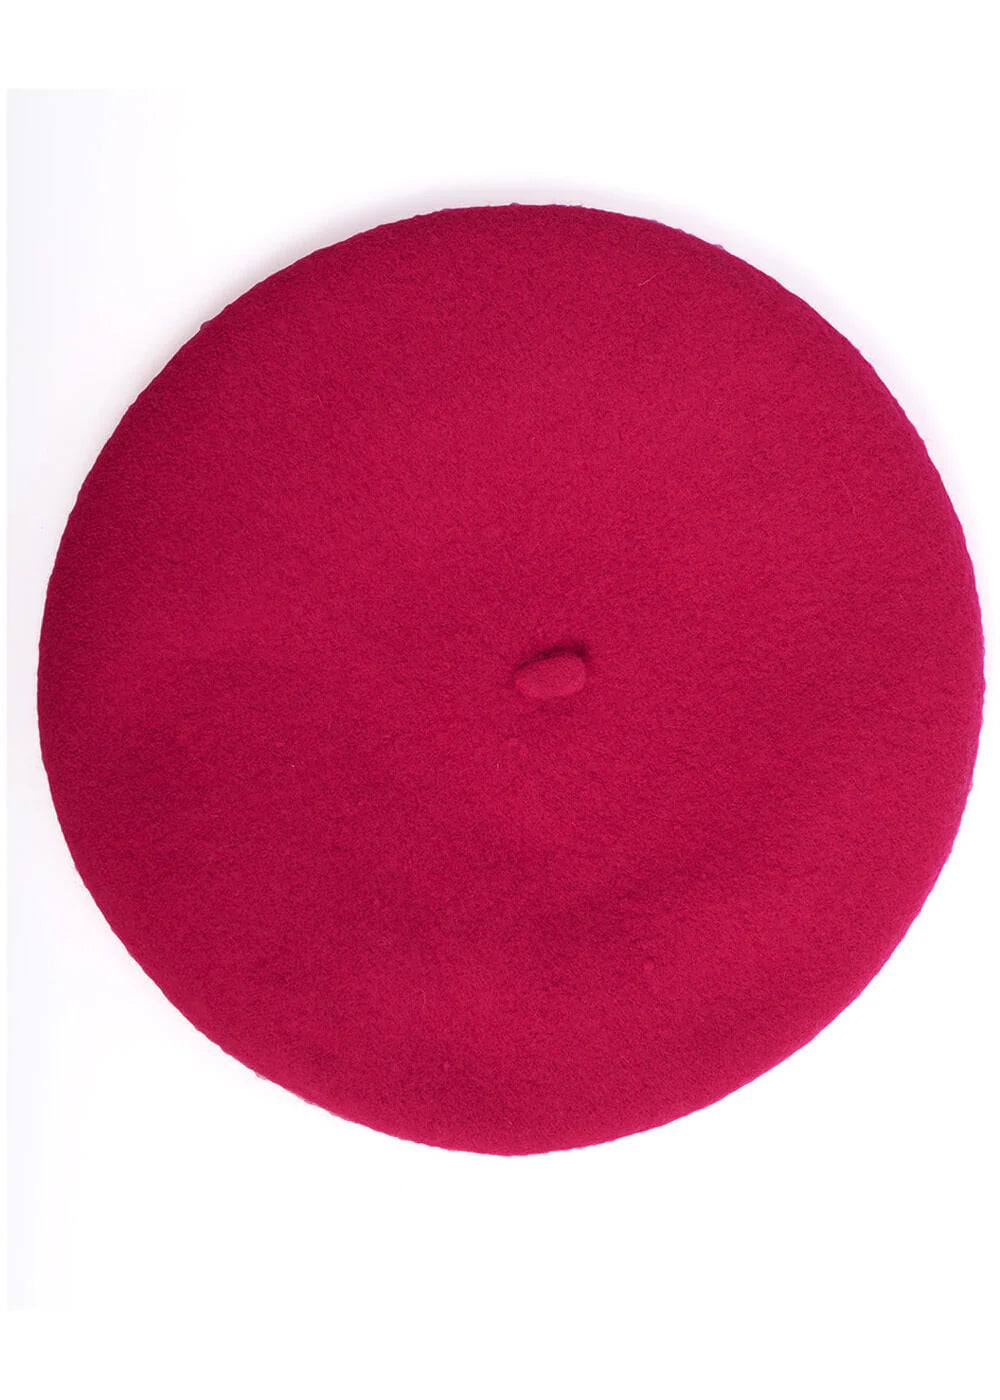 Banned Retro Clare 50s Beret in Hot Pink